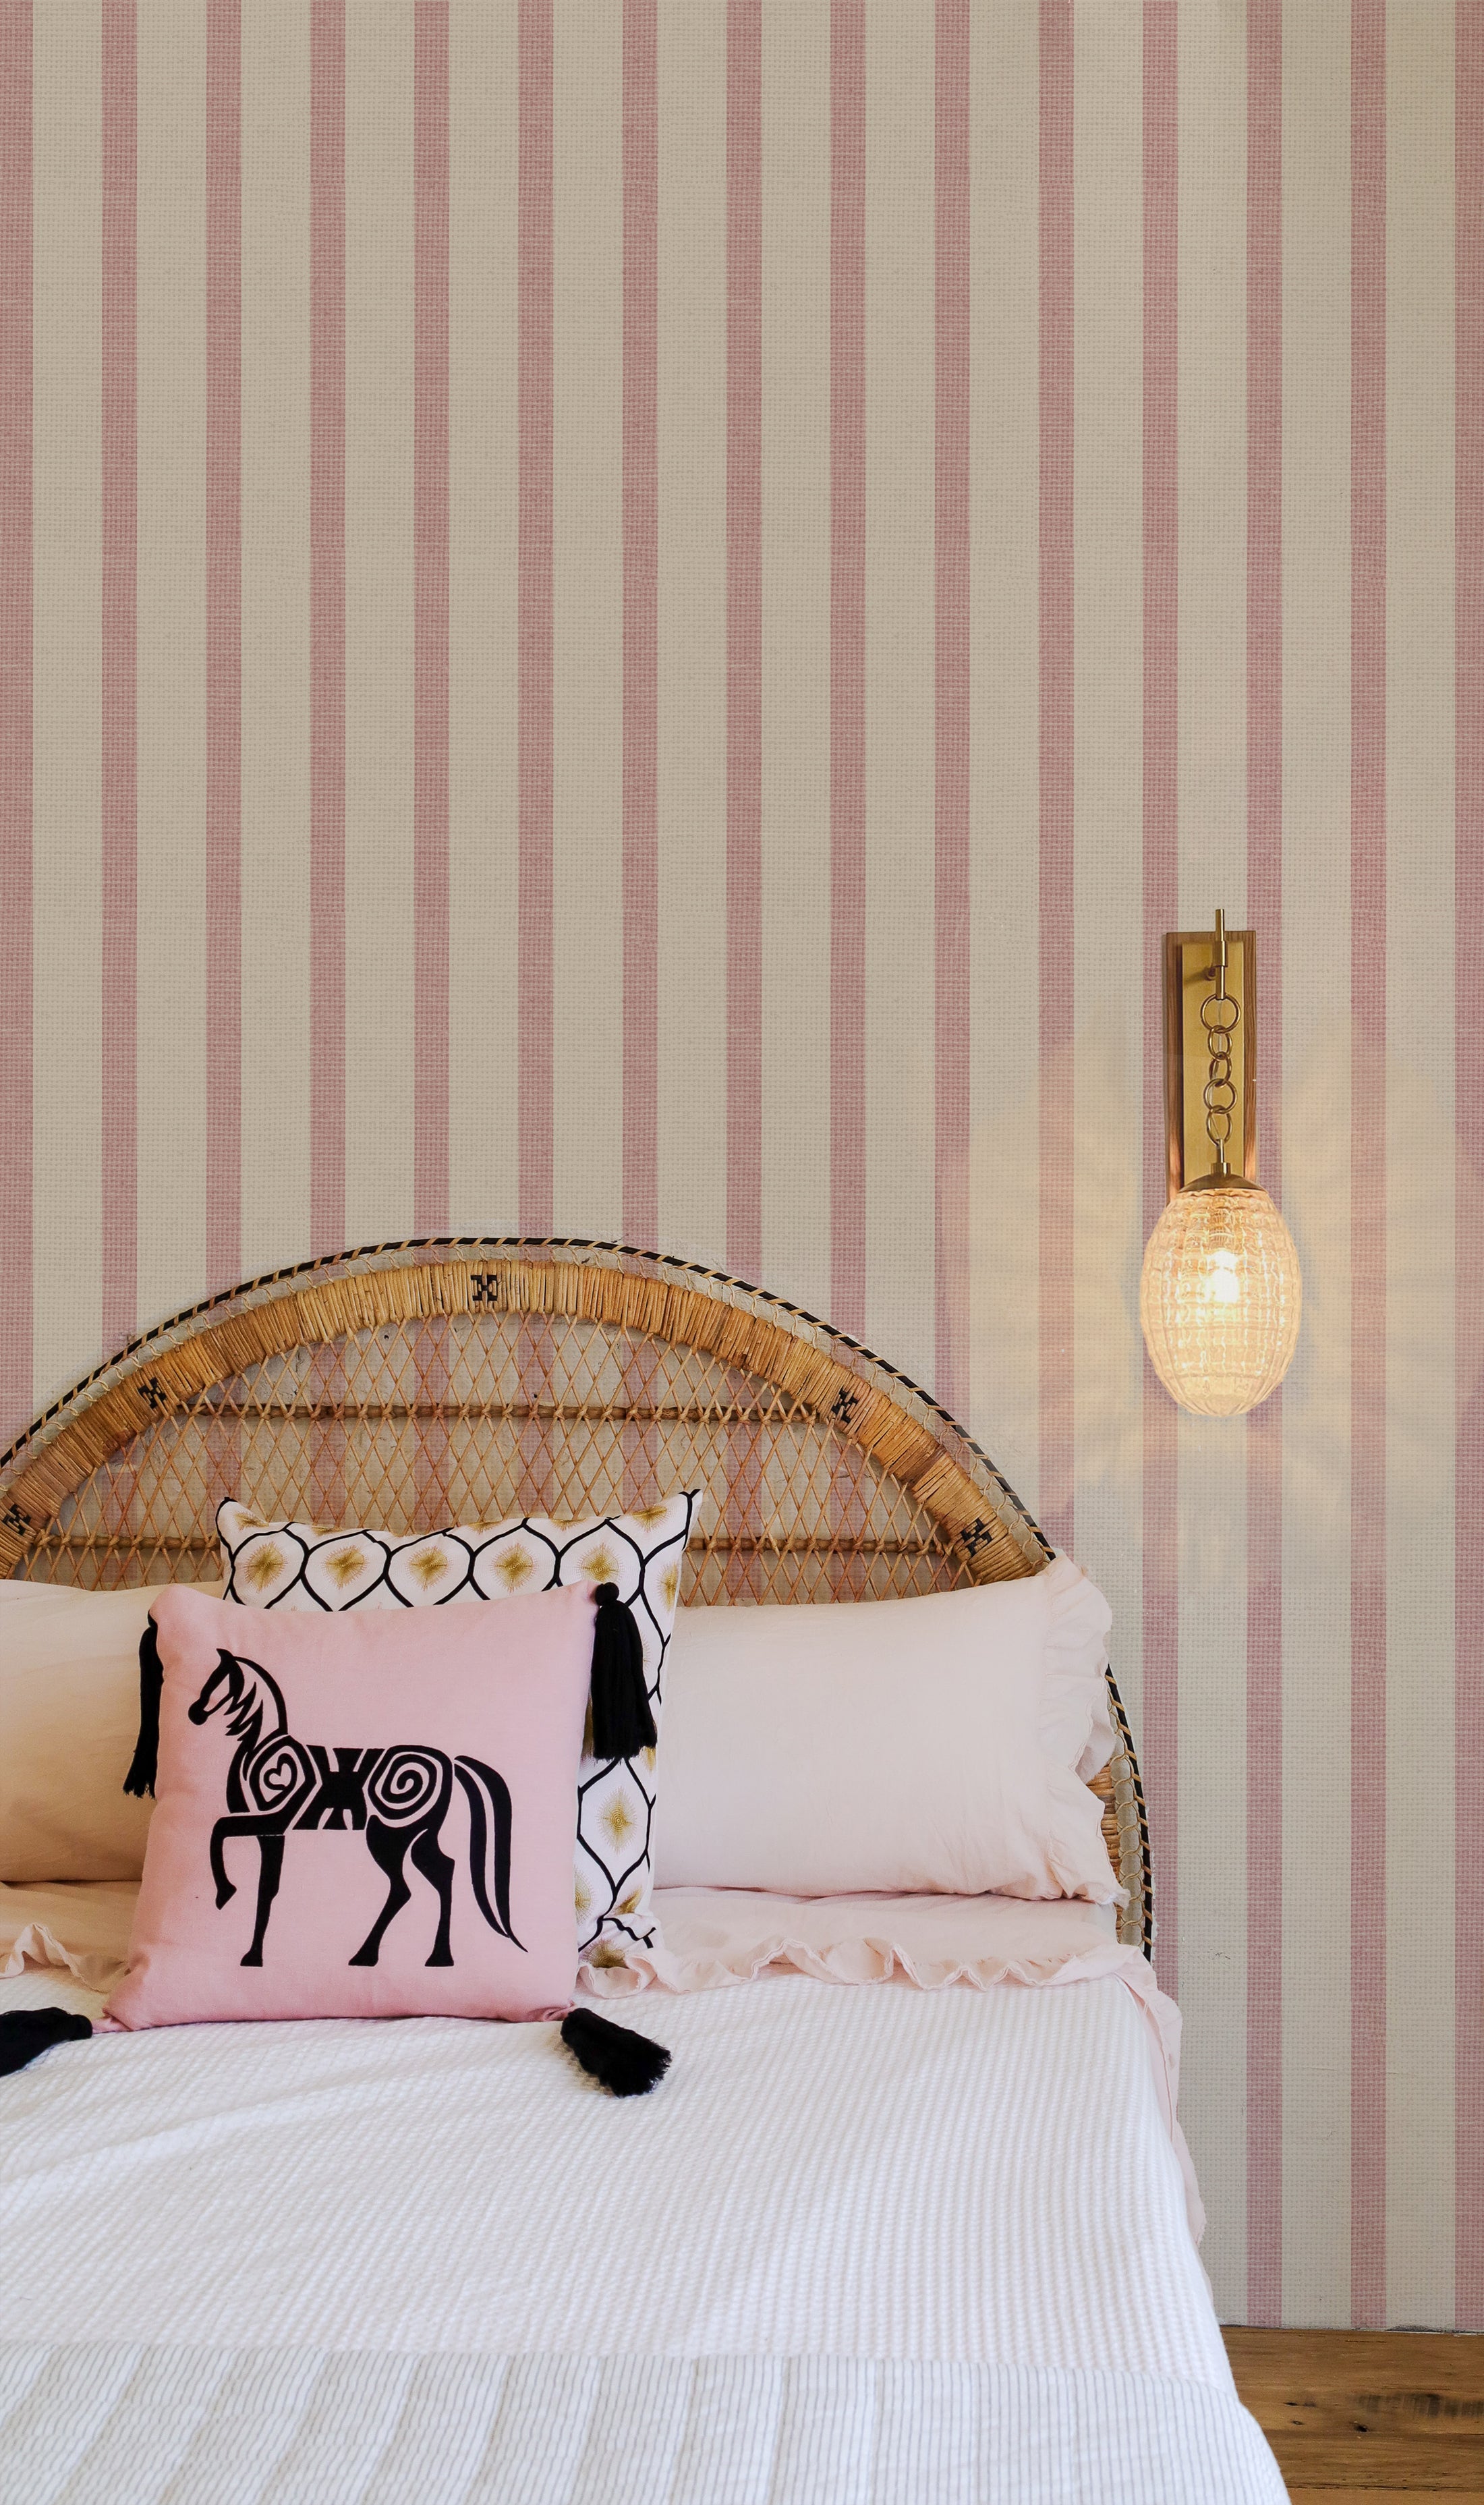 A serene bedroom setting featuring Pink Textured Striped Wallpaper with alternating light and dark pink stripes on a textured background. The room is styled with a rattan headboard, white bedding, and a decorative pink cushion with a horse motif, complemented by a modern wall-mounted light.